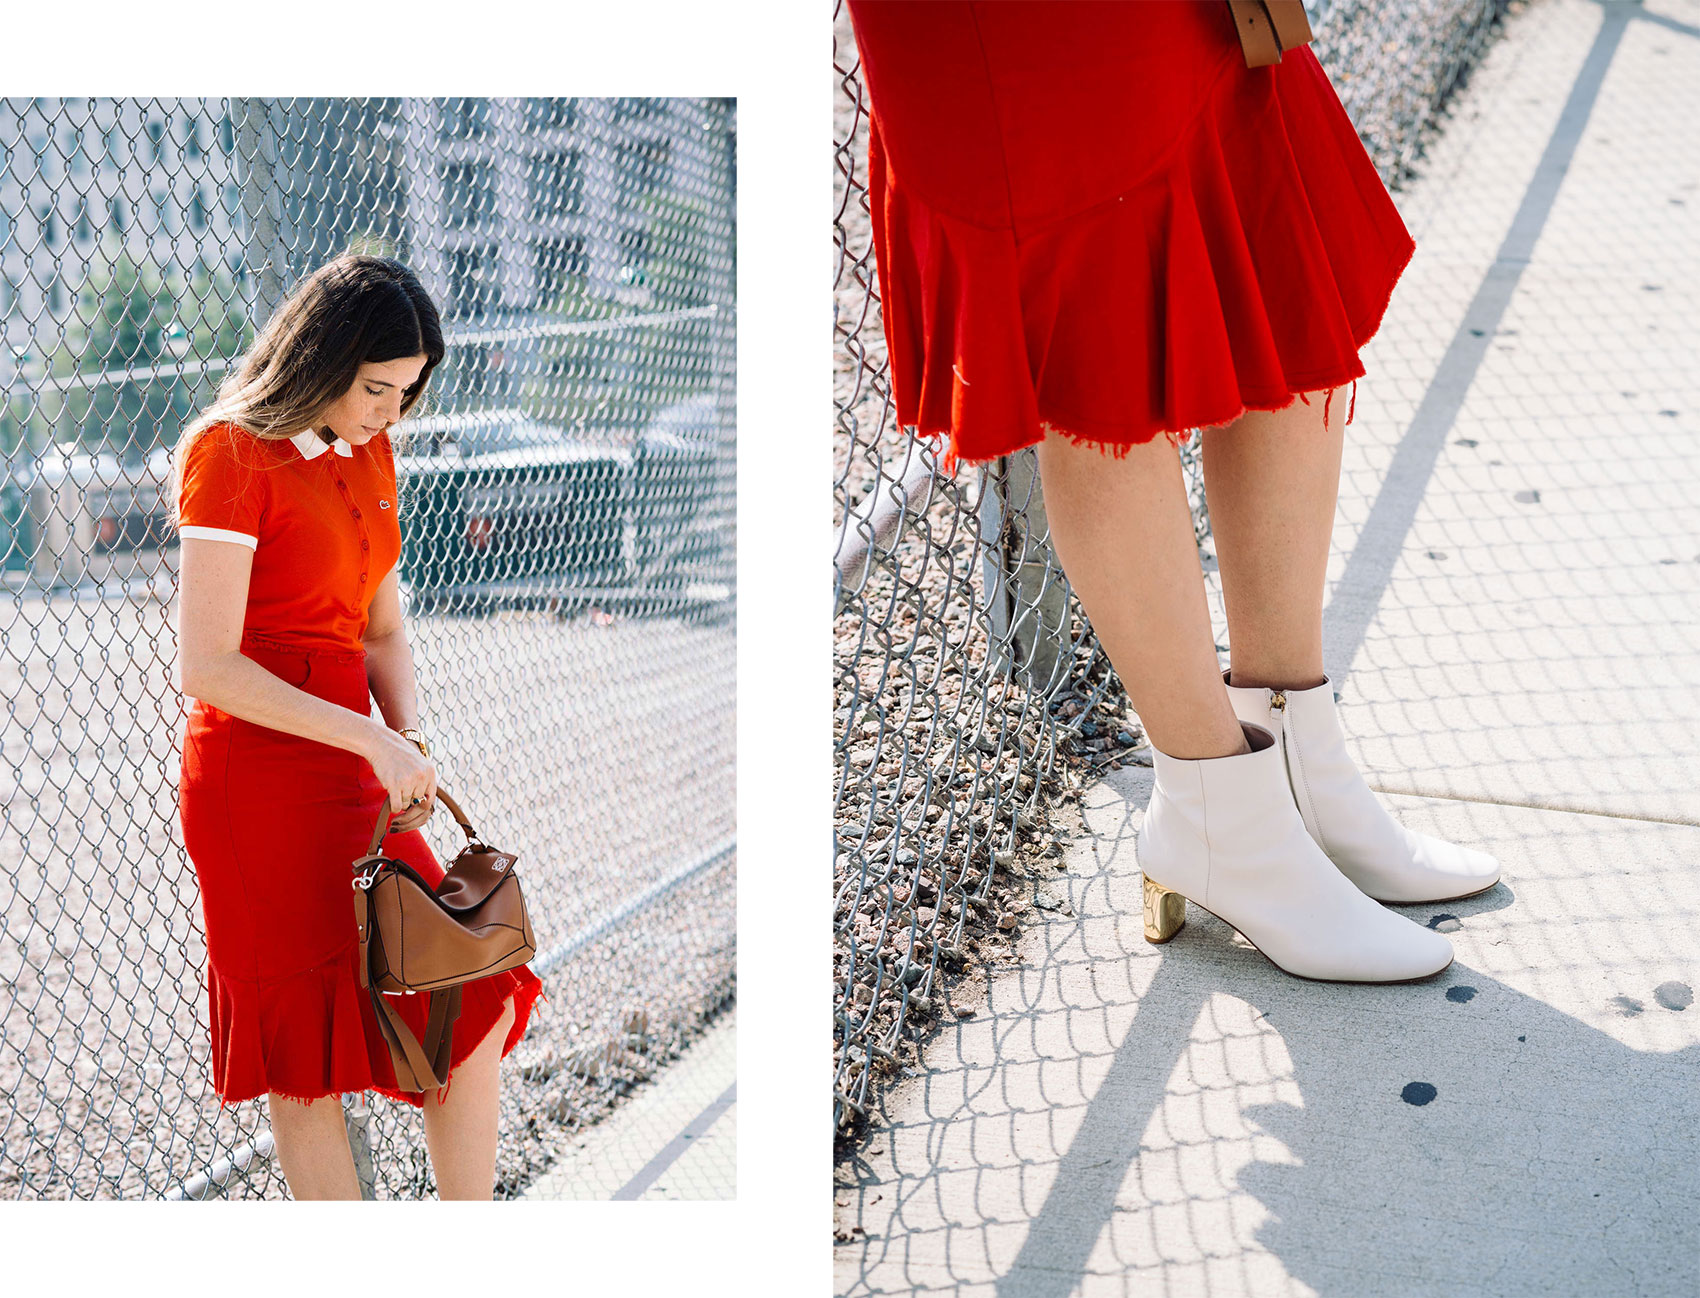 Maristella in NYFW wearing a red skirt, red Lacoste and white ankle boots